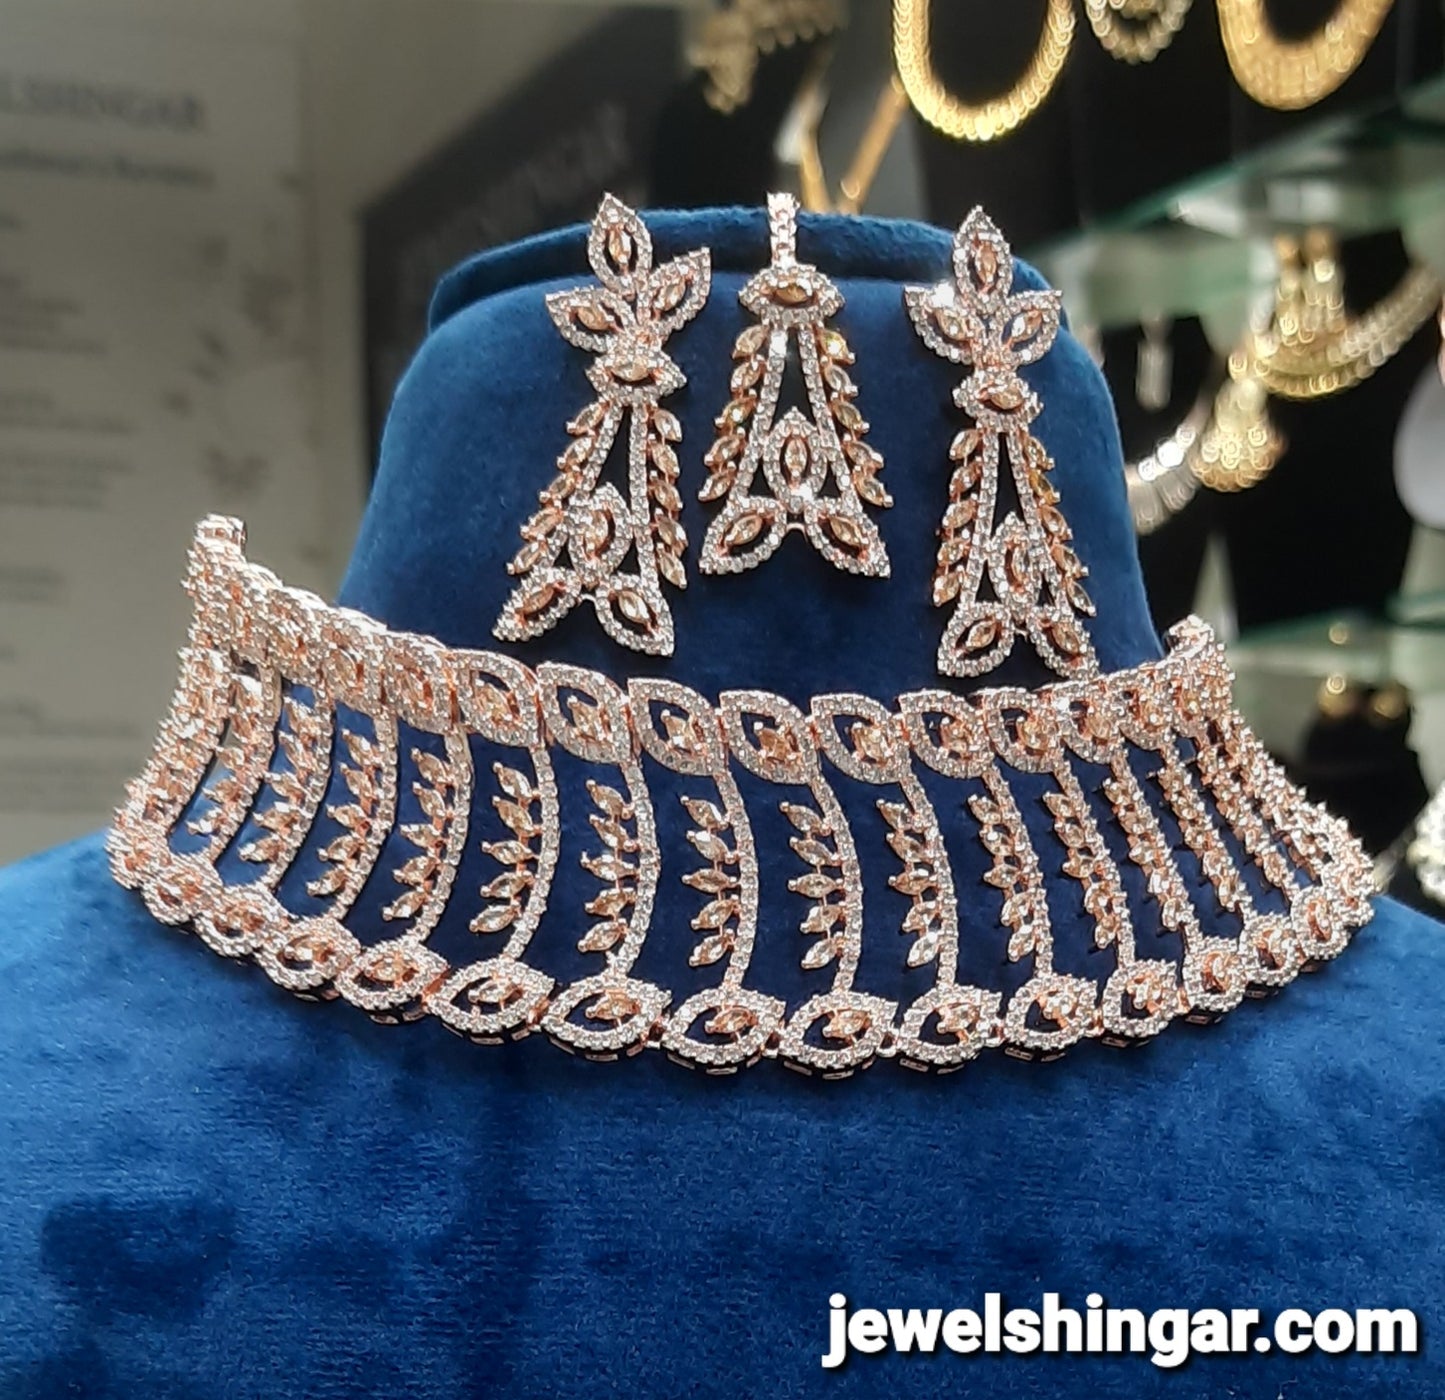 JEWELSHINGAR FINE ZIRCON ROSE GOLD PLATED DIAMOND LOOKING NECKLACE SET IN CHOKER STYLE WITH EARRINGS AND MAANGTIKKA FOR GIRLS (234042JS)